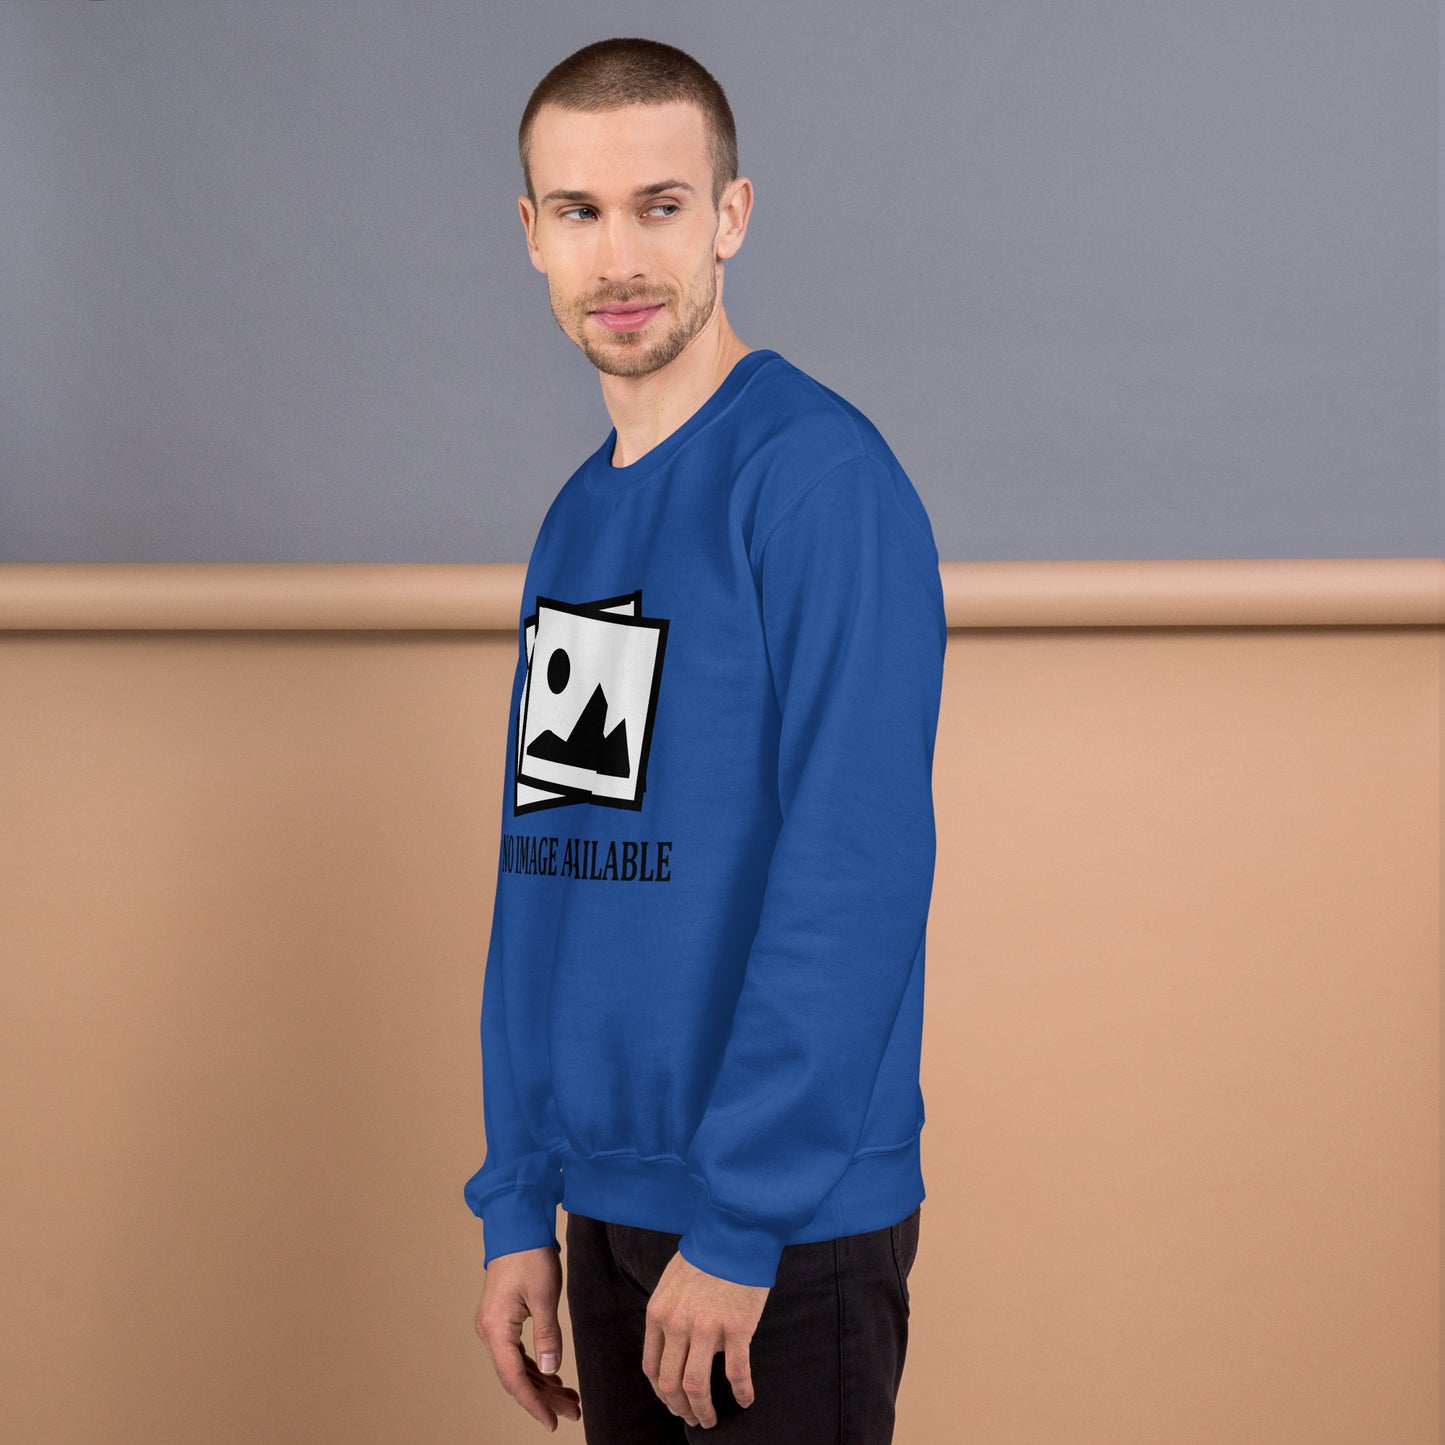 Men with royal blue sweatshirt with image and text "no image available"